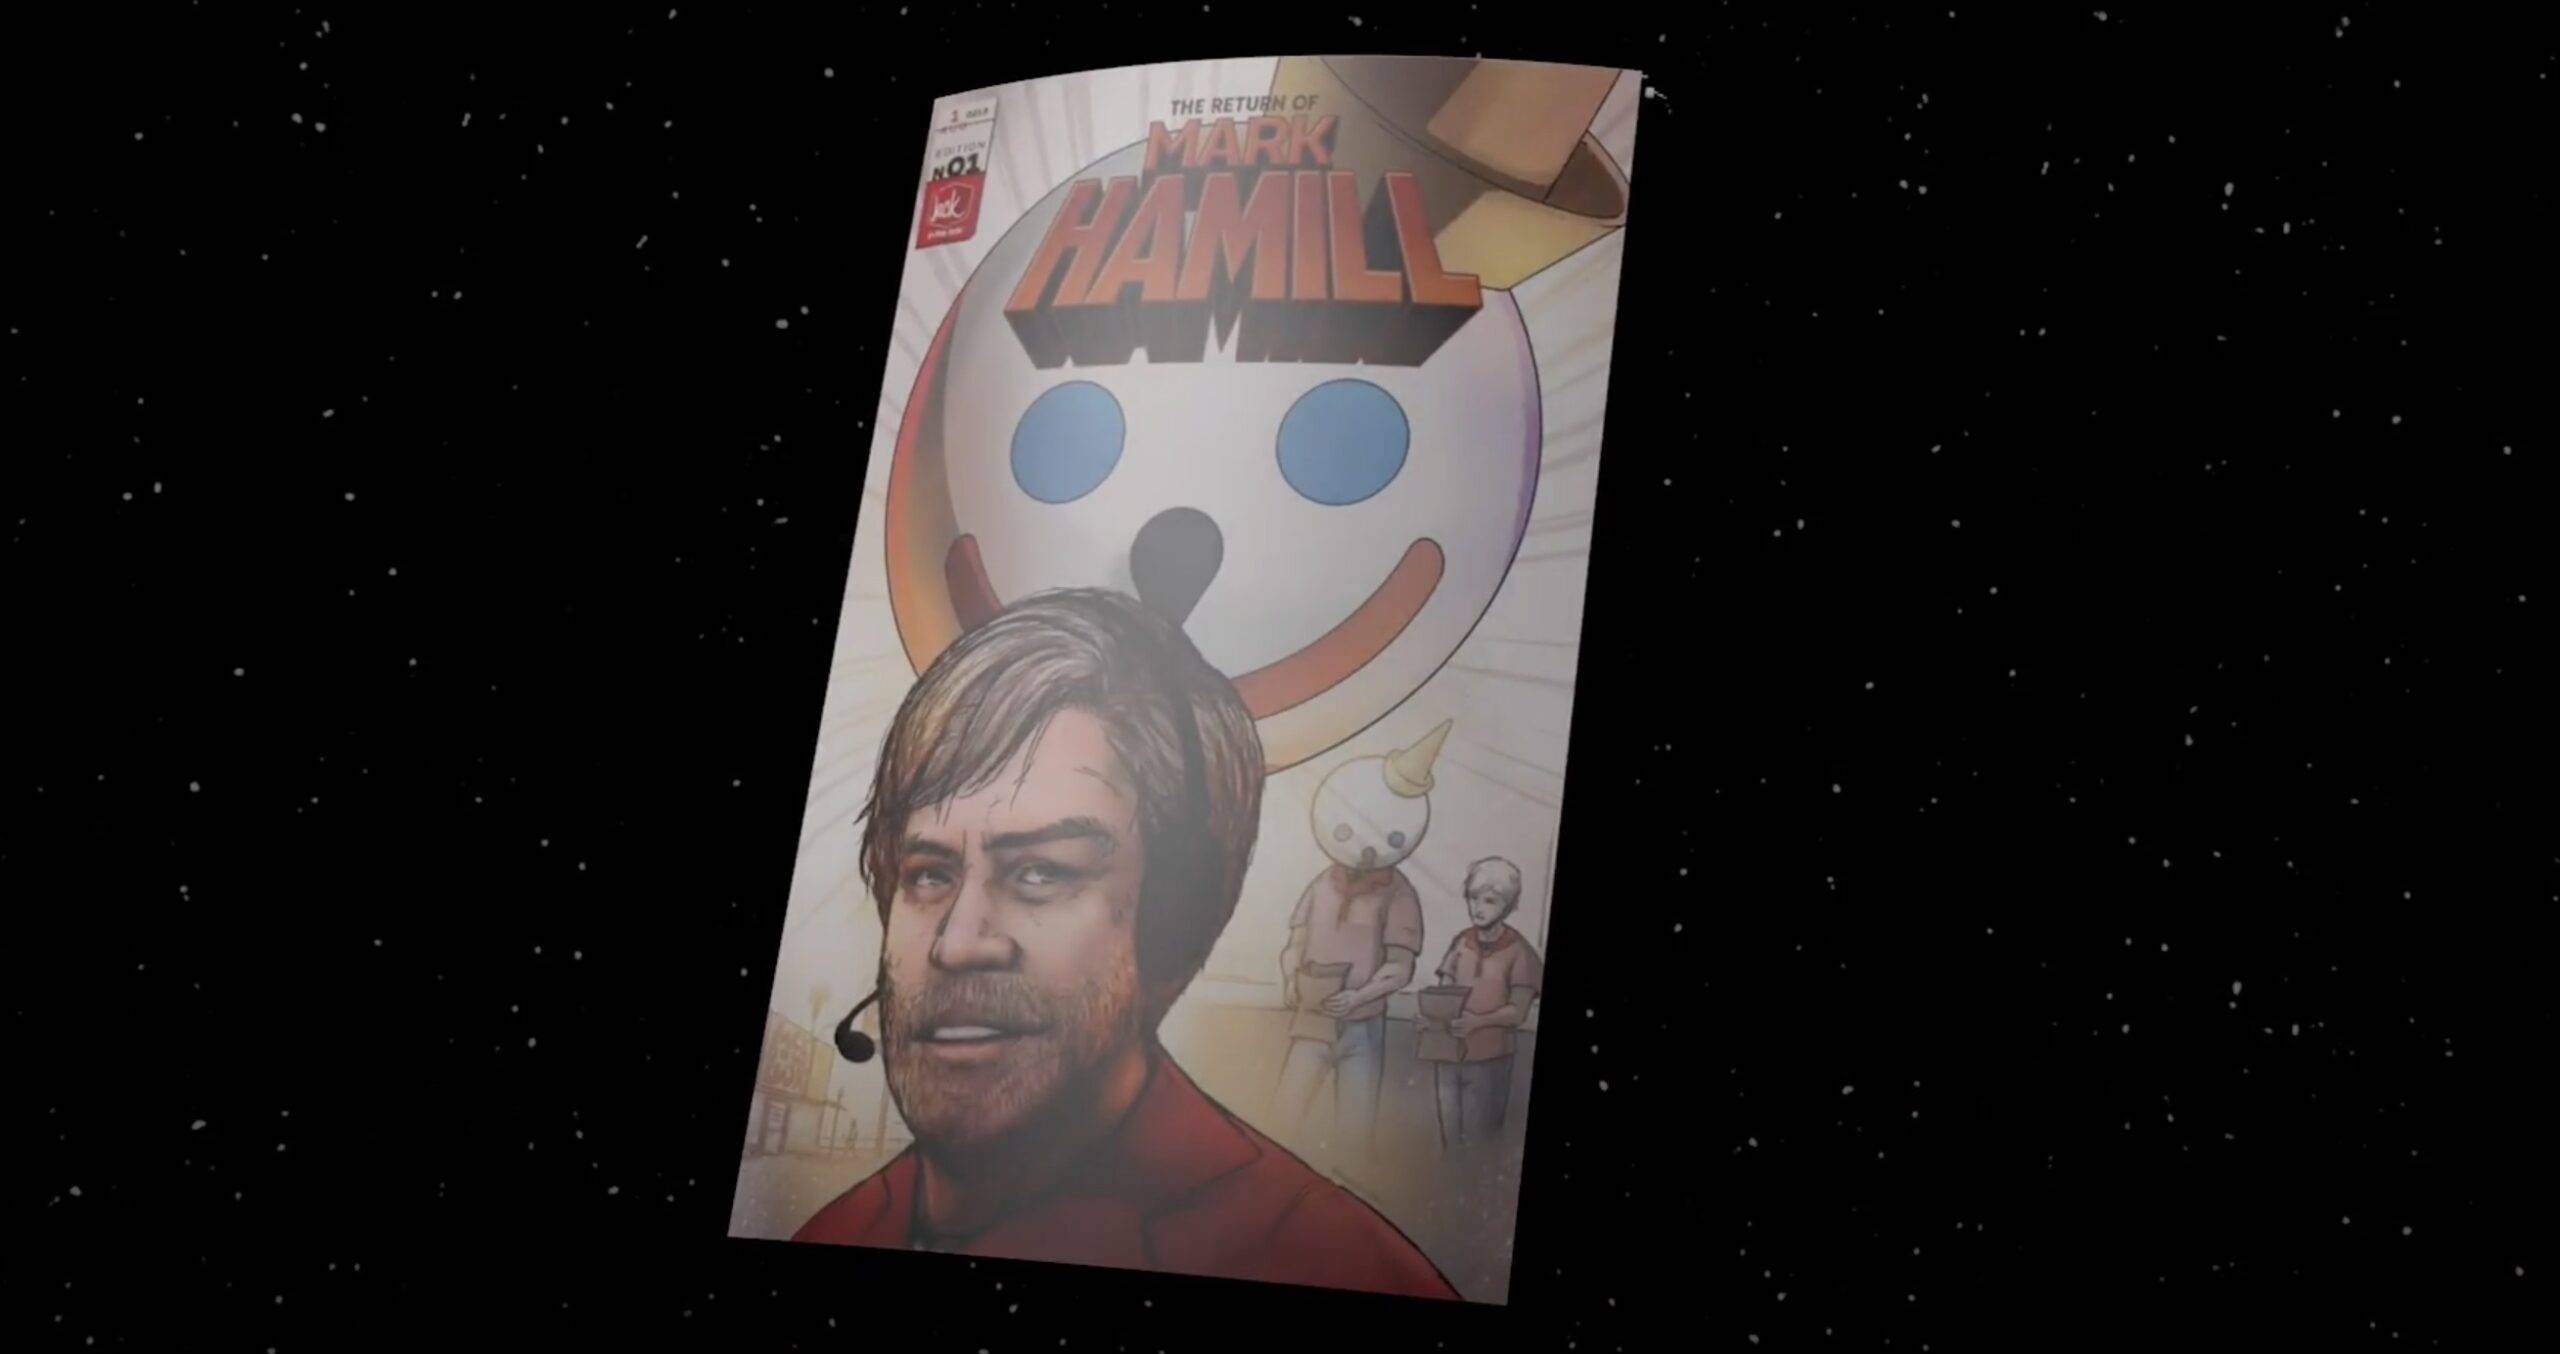 Animated comic book Cover with Mark Hamill and Jack in the Box in space